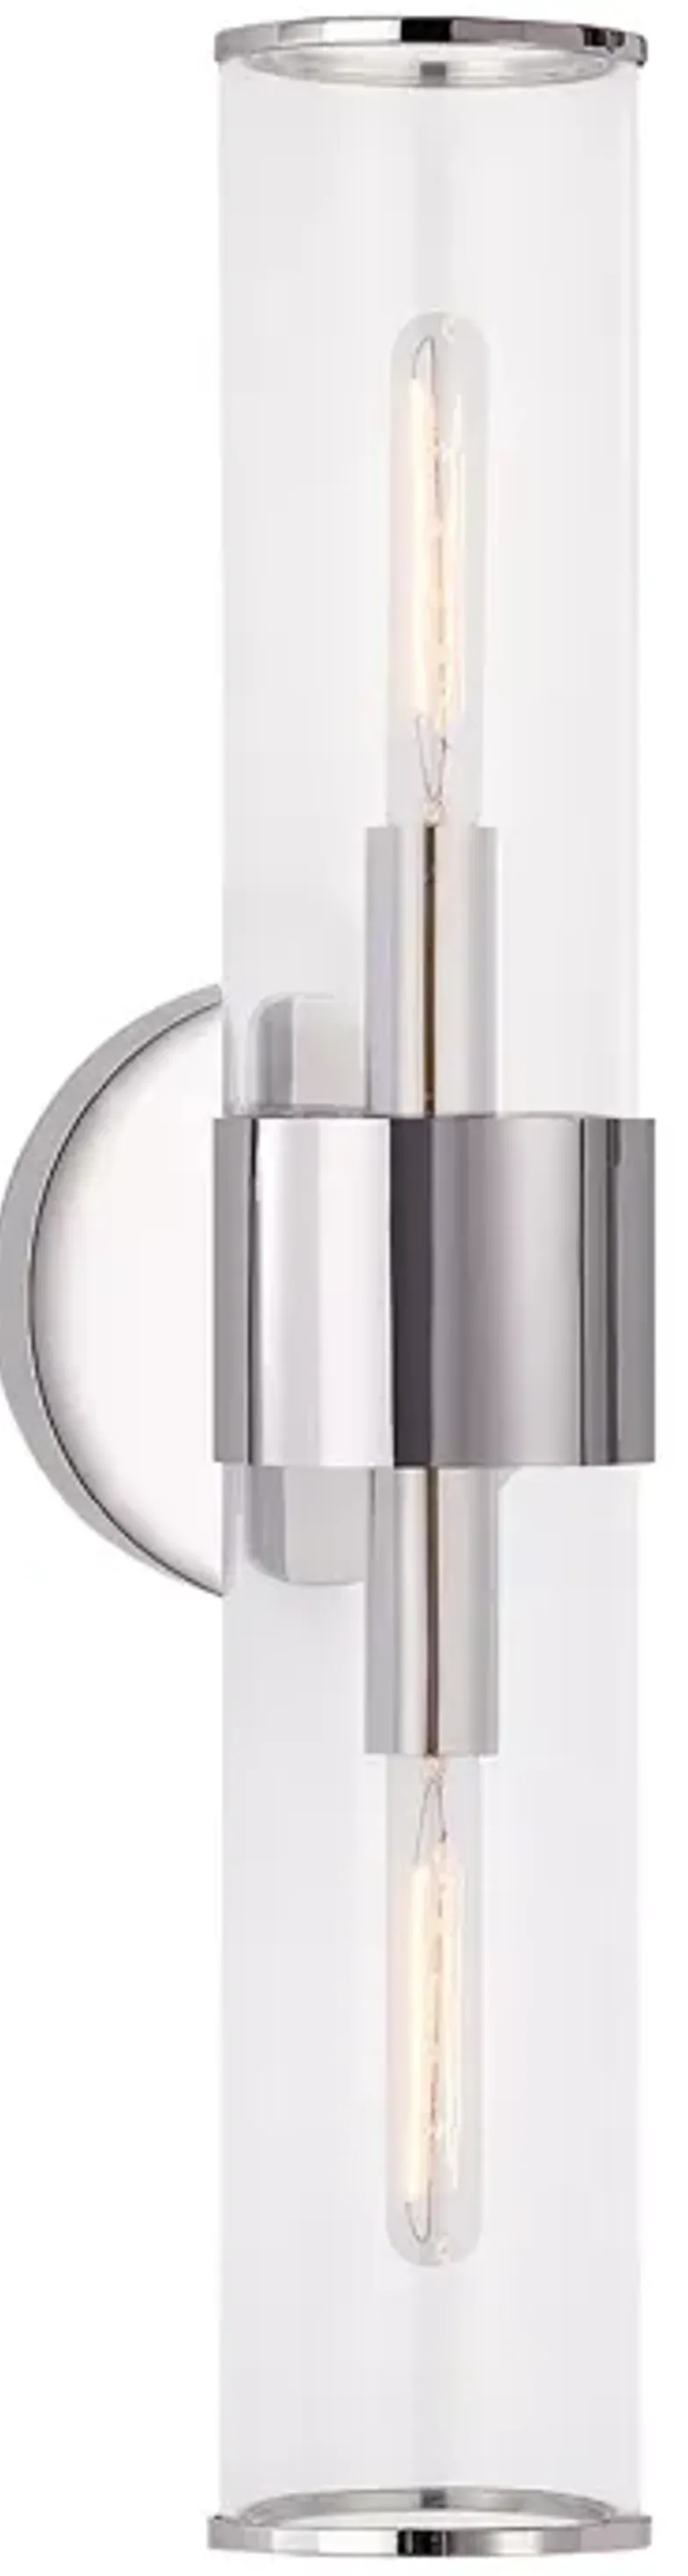 Kelly Wearstler Liaison Medium Sconce with Clear Glass Shade